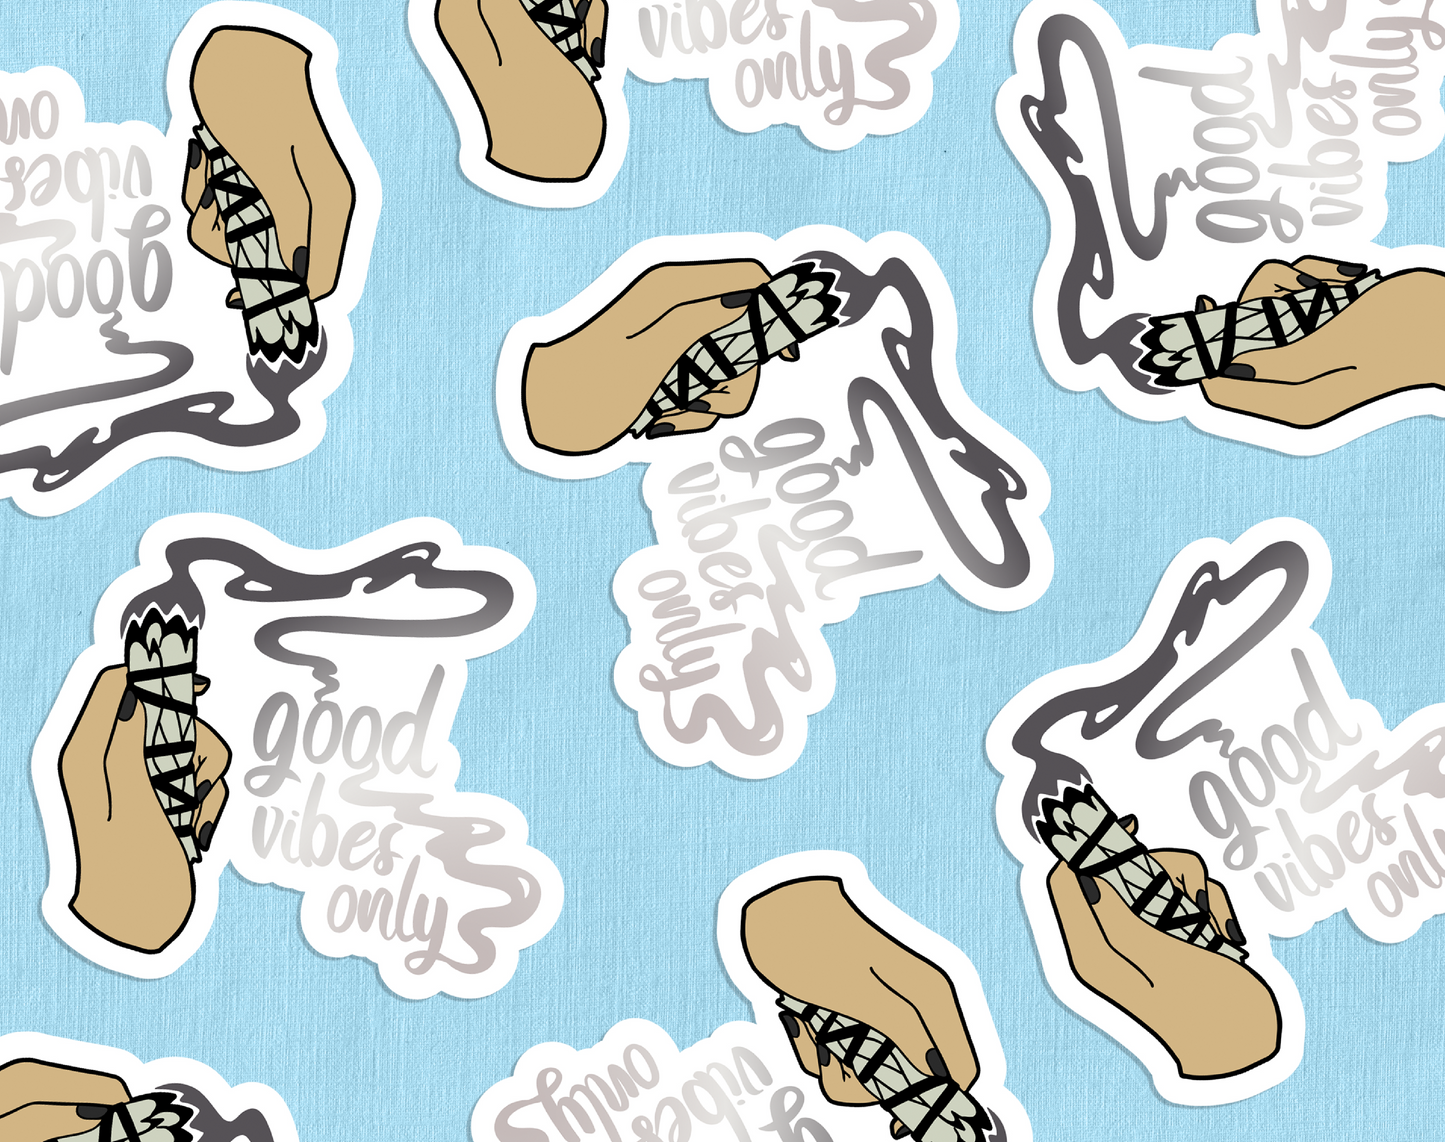 A collection of diecut stickers featuring a picture of a hand holding a sage stick and text reading "Good Vibes Only" against a blue paper background